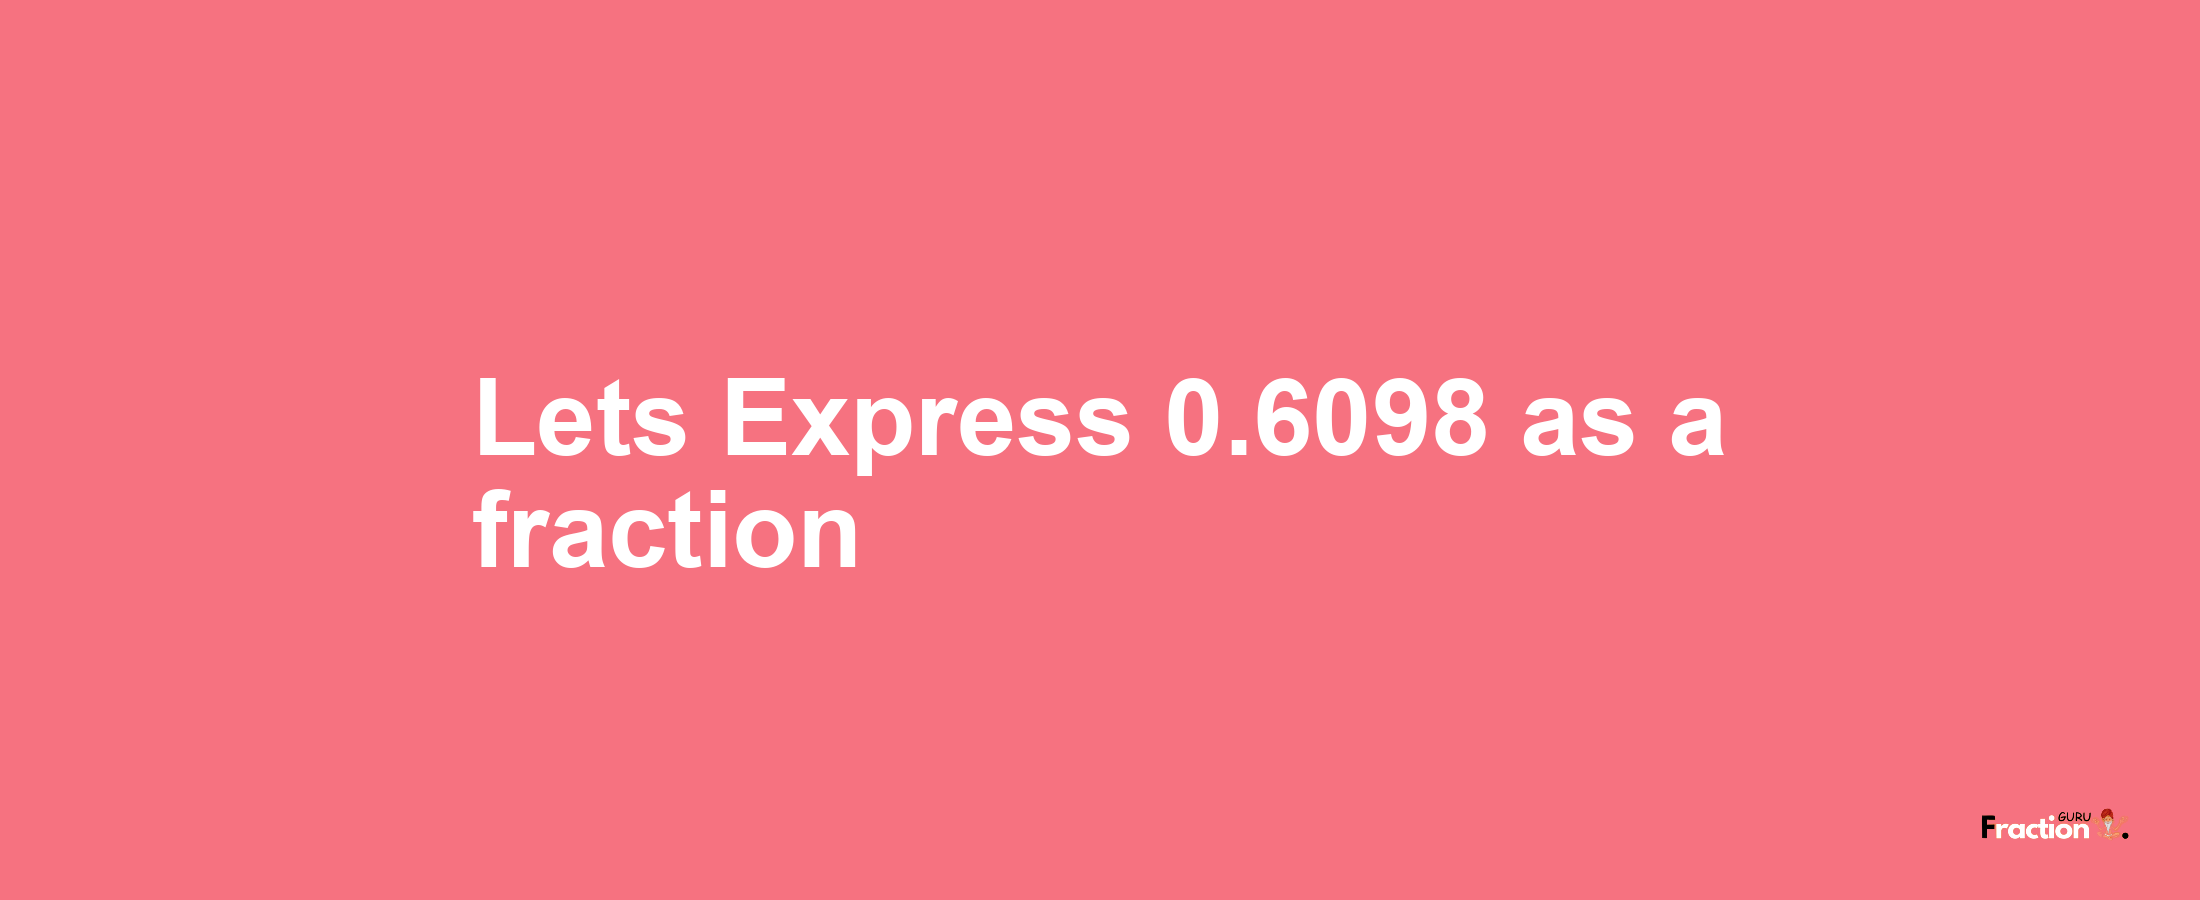 Lets Express 0.6098 as afraction